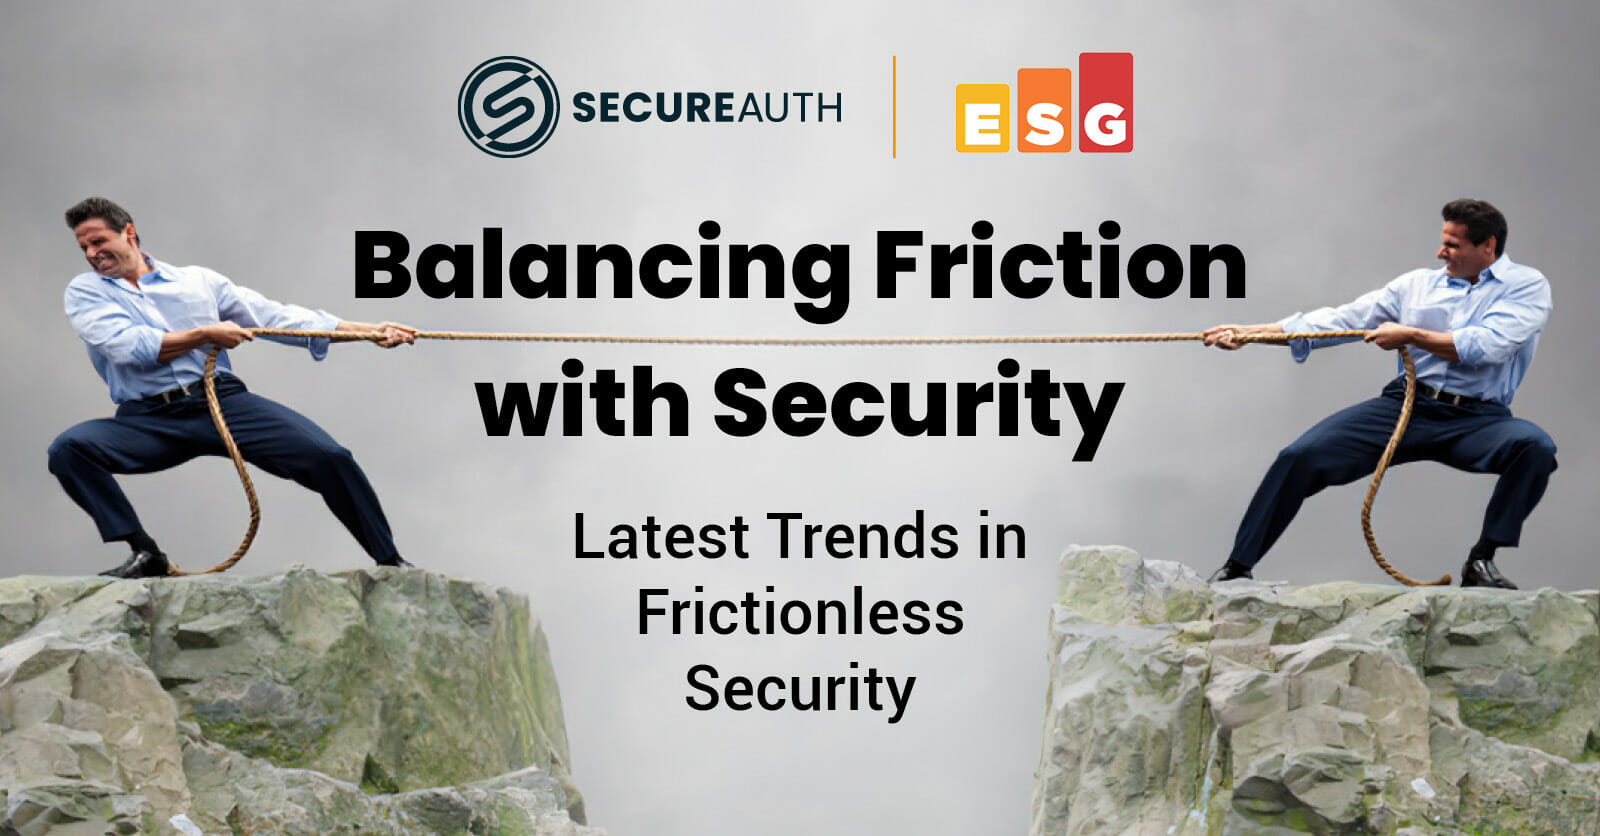 Balancing Security with Friction